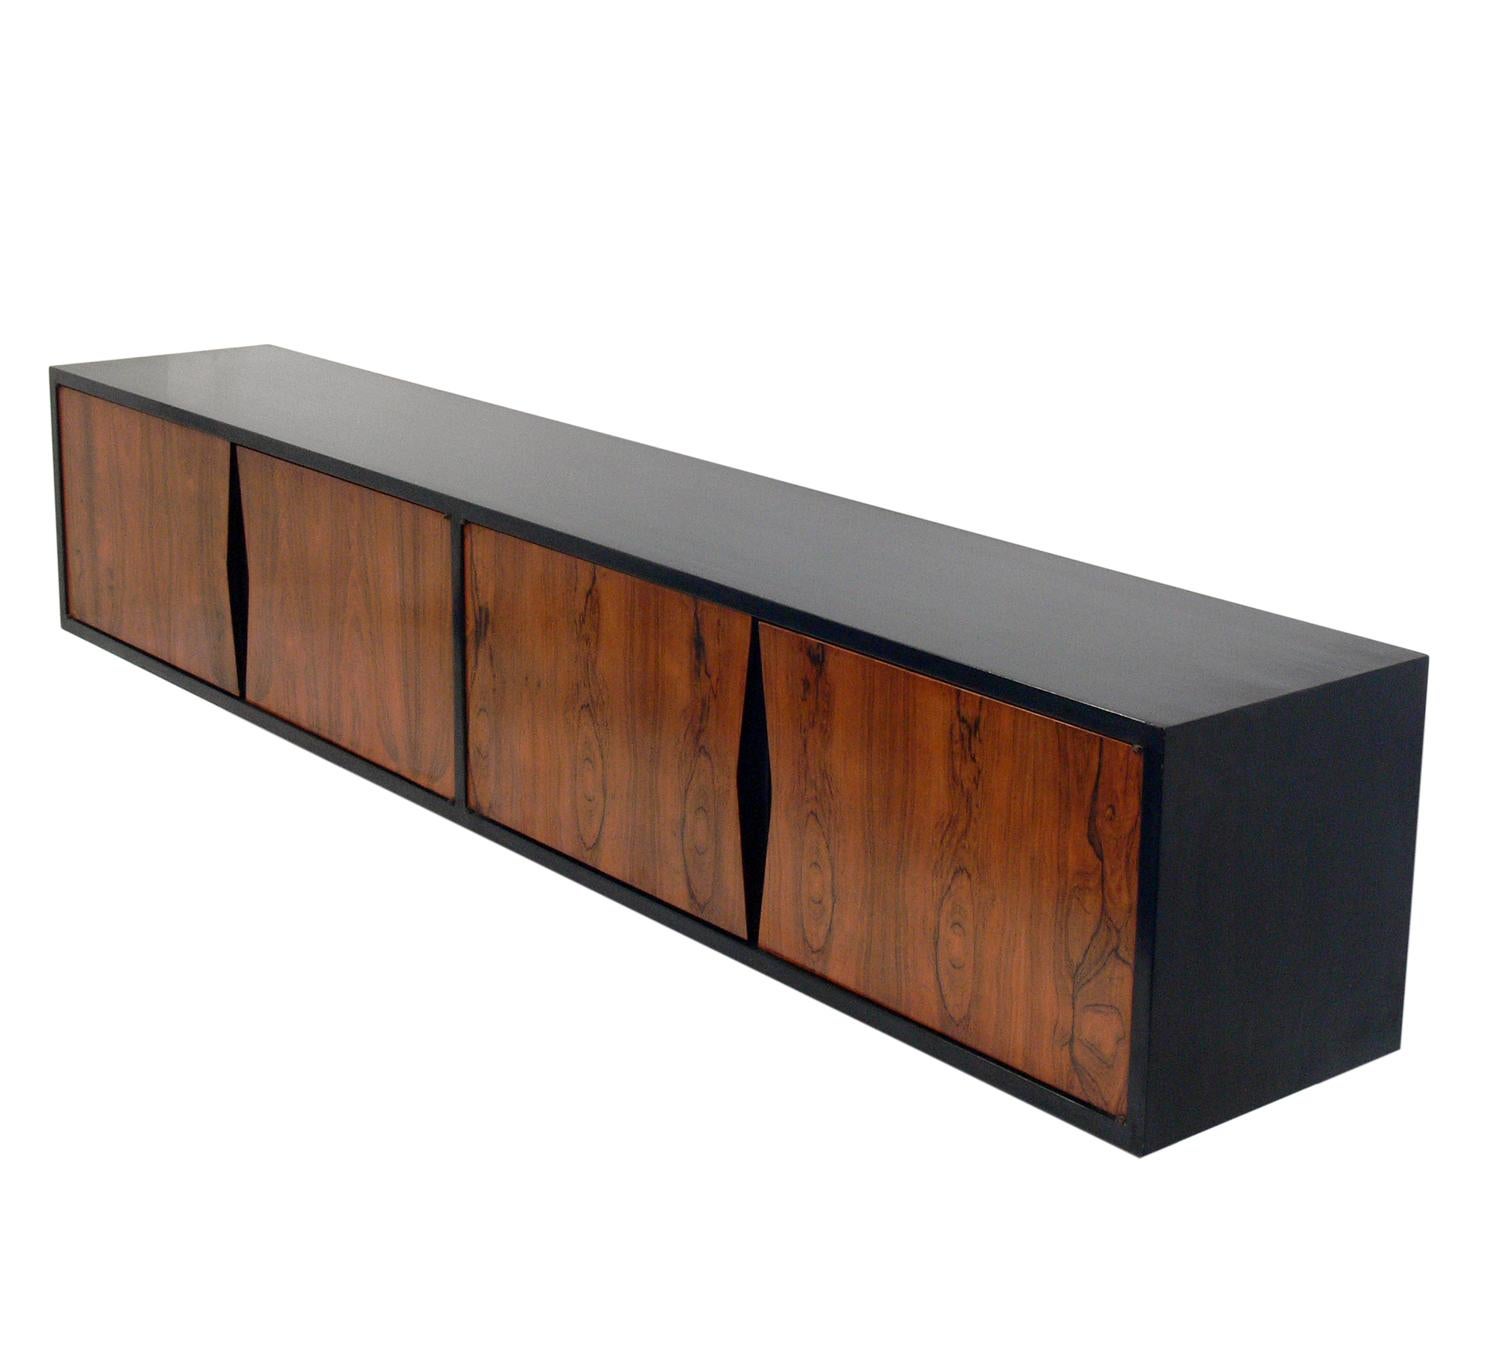 Wall-mounted rosewood console, American, circa 1960s. This piece is a versatile size and can be used as a console table, credenza, media cabinet for your TV, or as a vanity or desk. It is constructed of black lacquered wood and rosewood with a low